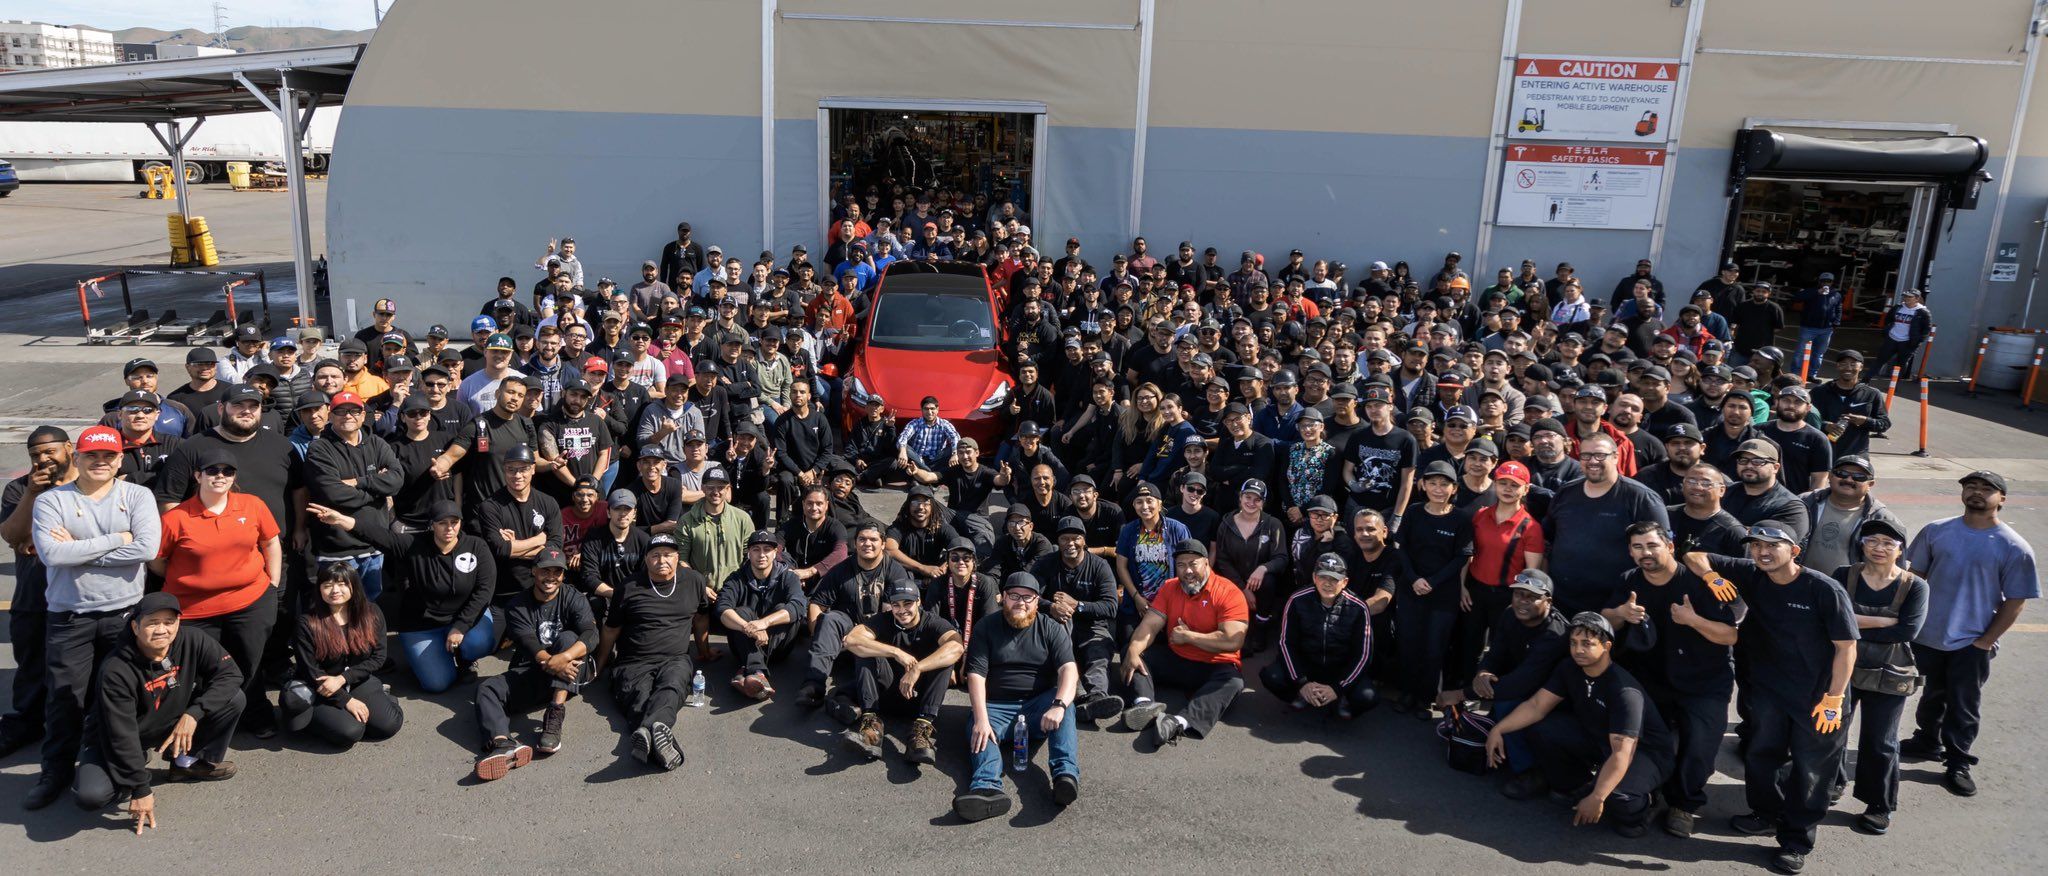 Tesla Just Produced Its One Millionth Car, Doubters Bite the Dust